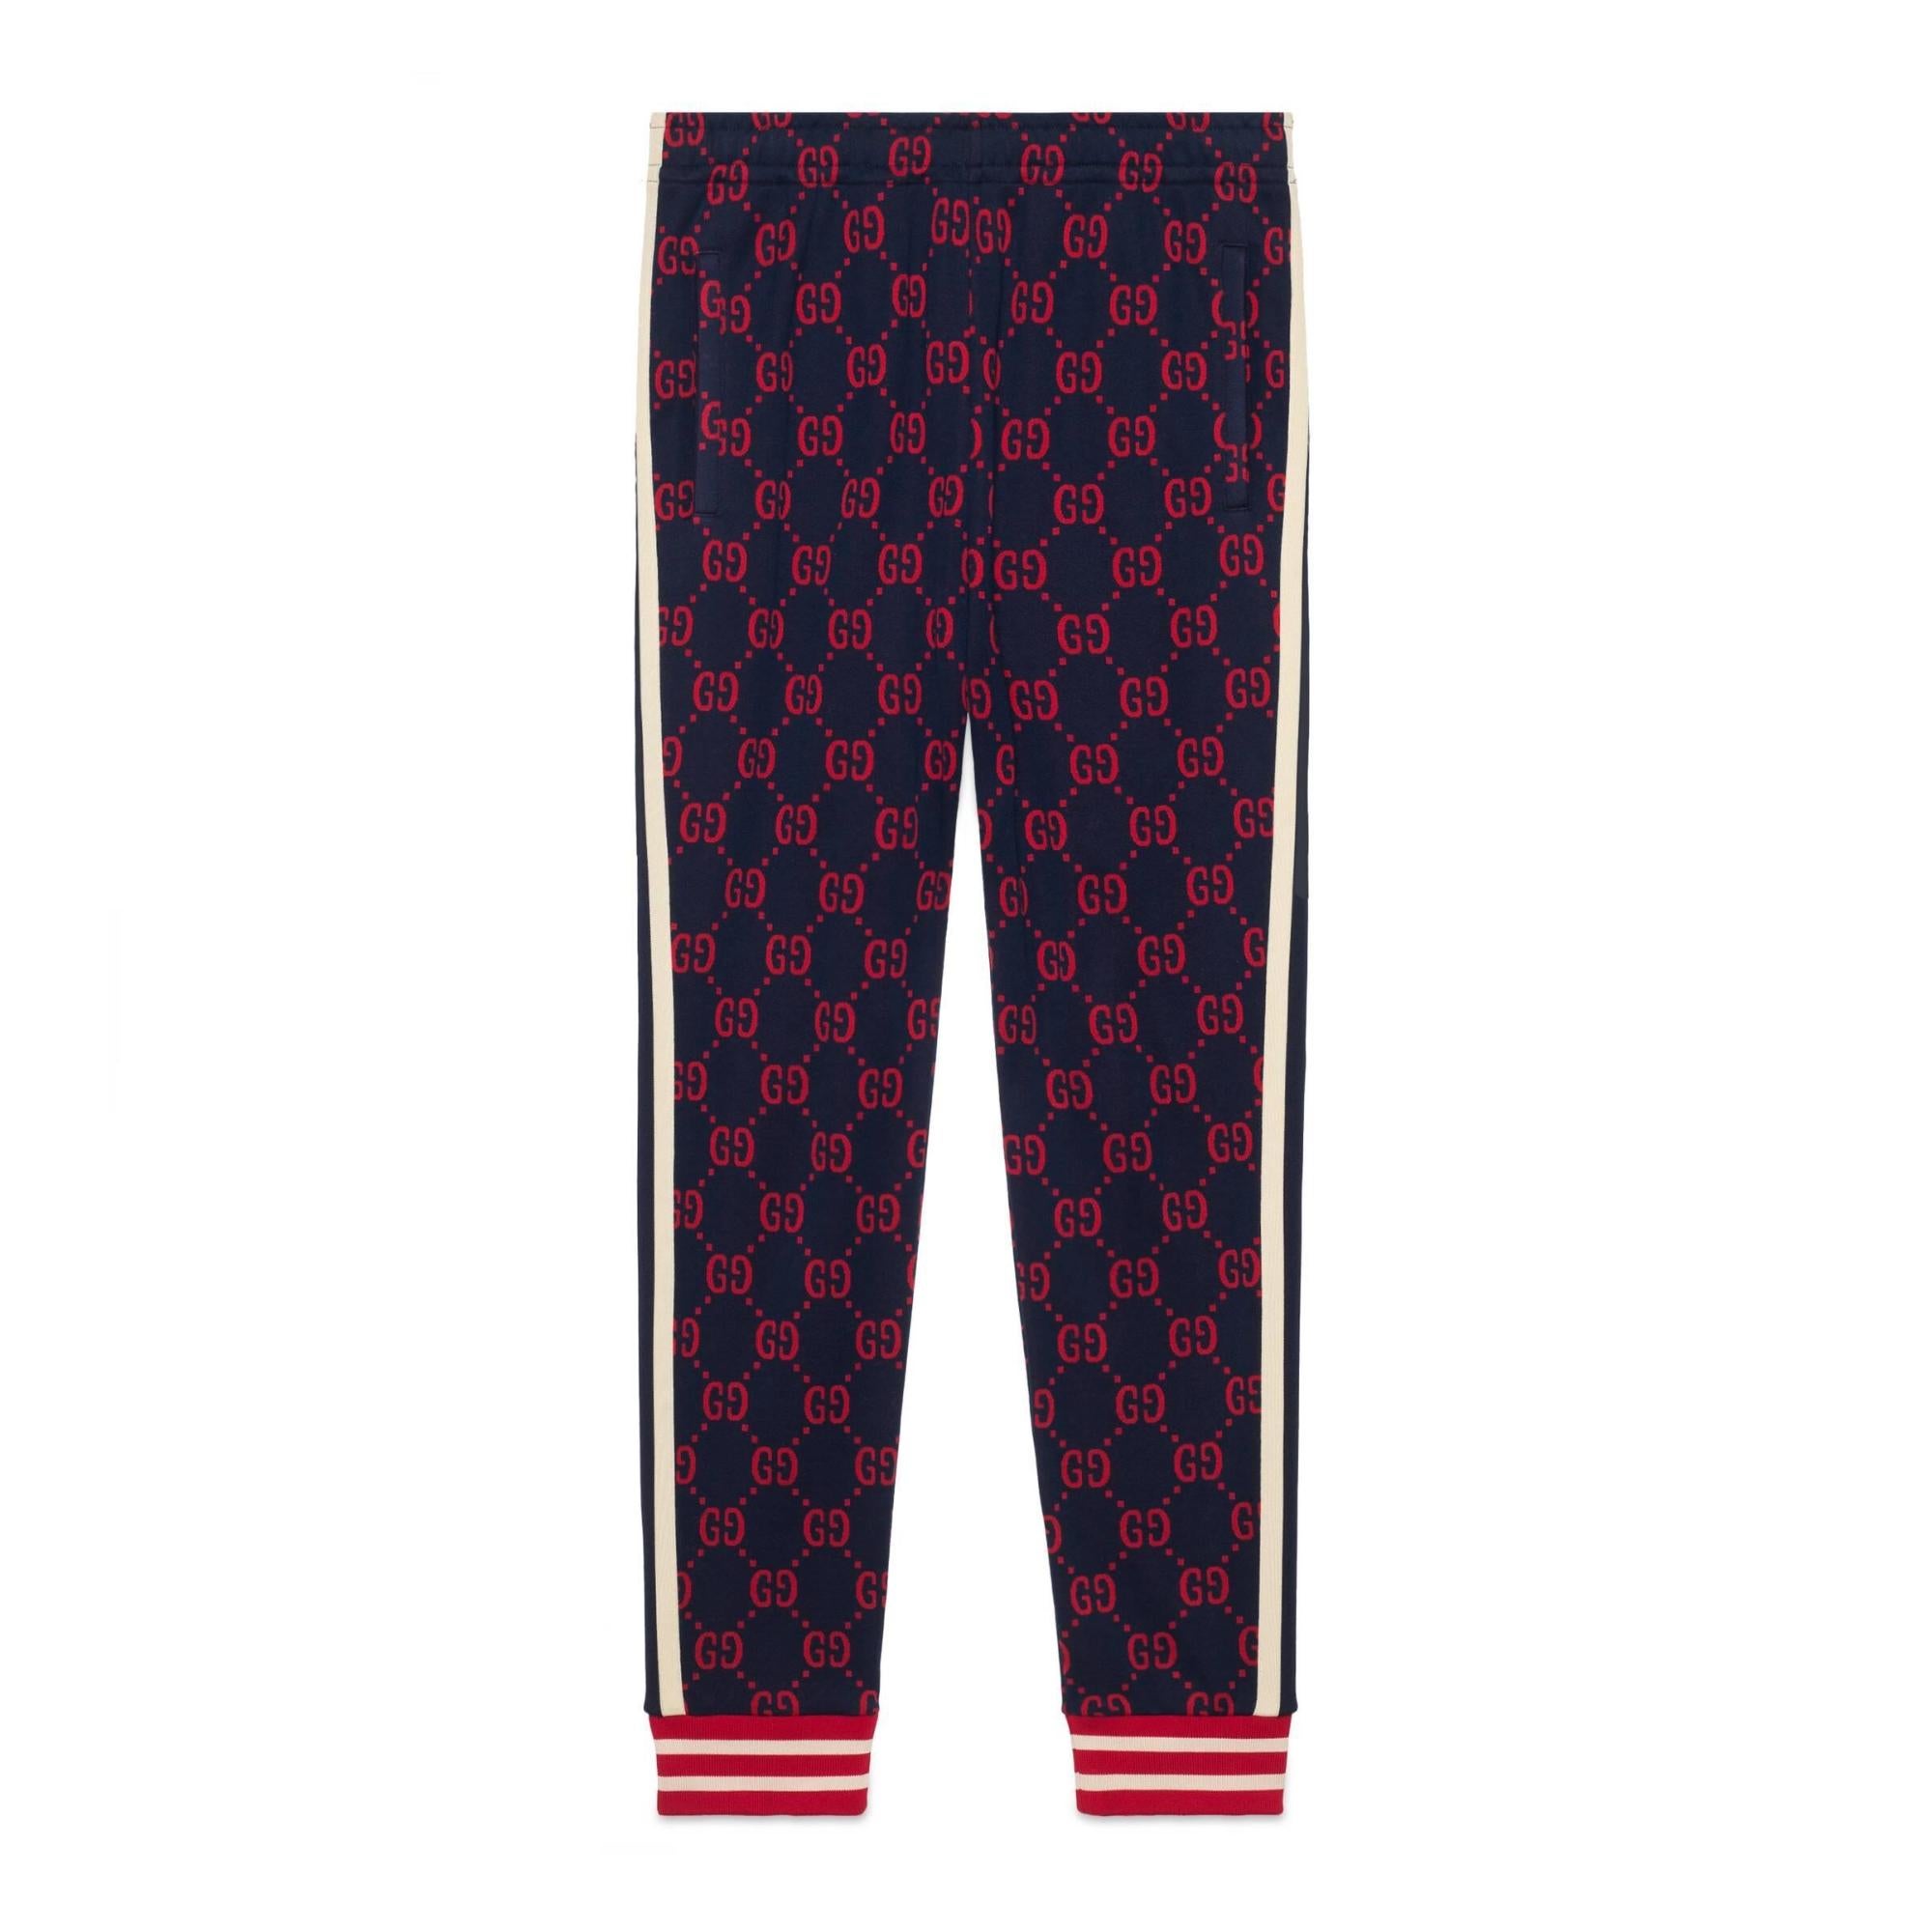 Gucci Navy sweatpants with monogram GG red jacquard. White and red cuff. Pants are in secondary location. May take 1-2 weeks to ship.

Color: Navy blue with red monogram jacquard
Material: Cotton
Code: 337506 Z5286
Condition: Good. Ask for more